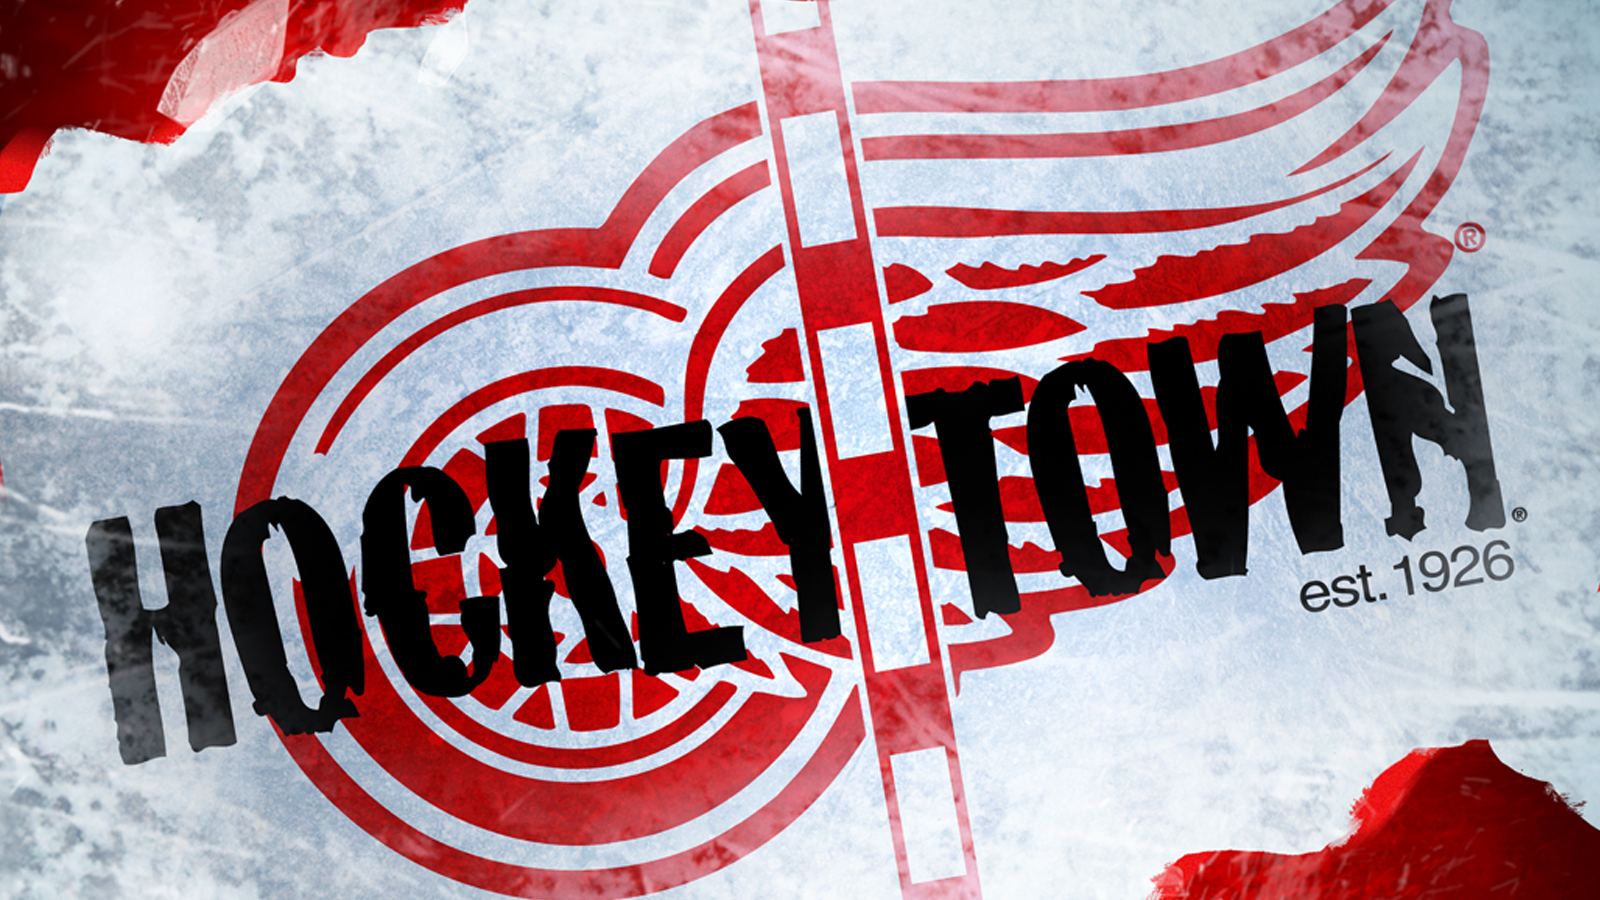 red wings wallpaper,font,banner,graphics,graphic design,flag